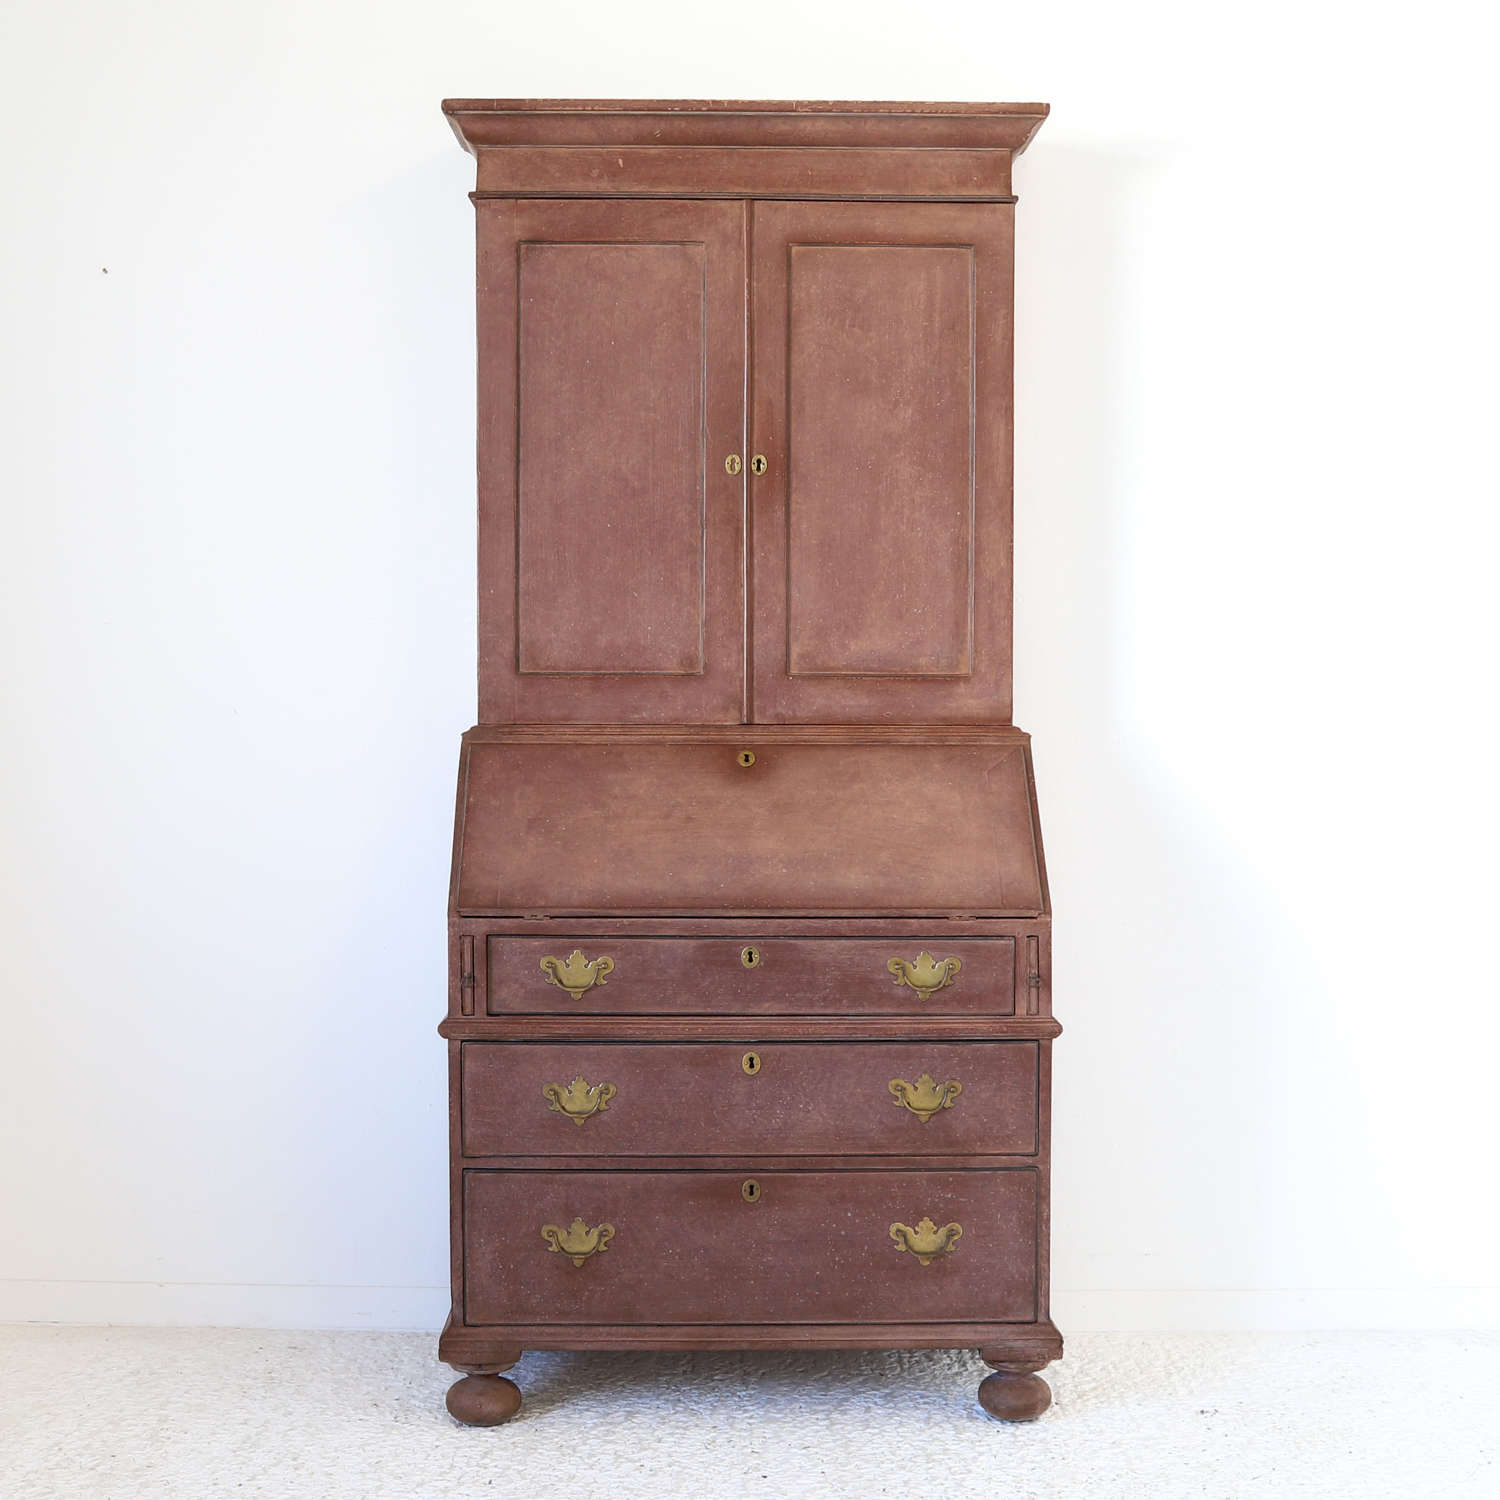 19th C. Bureau Bookcase - later painted in burnt red umber finish